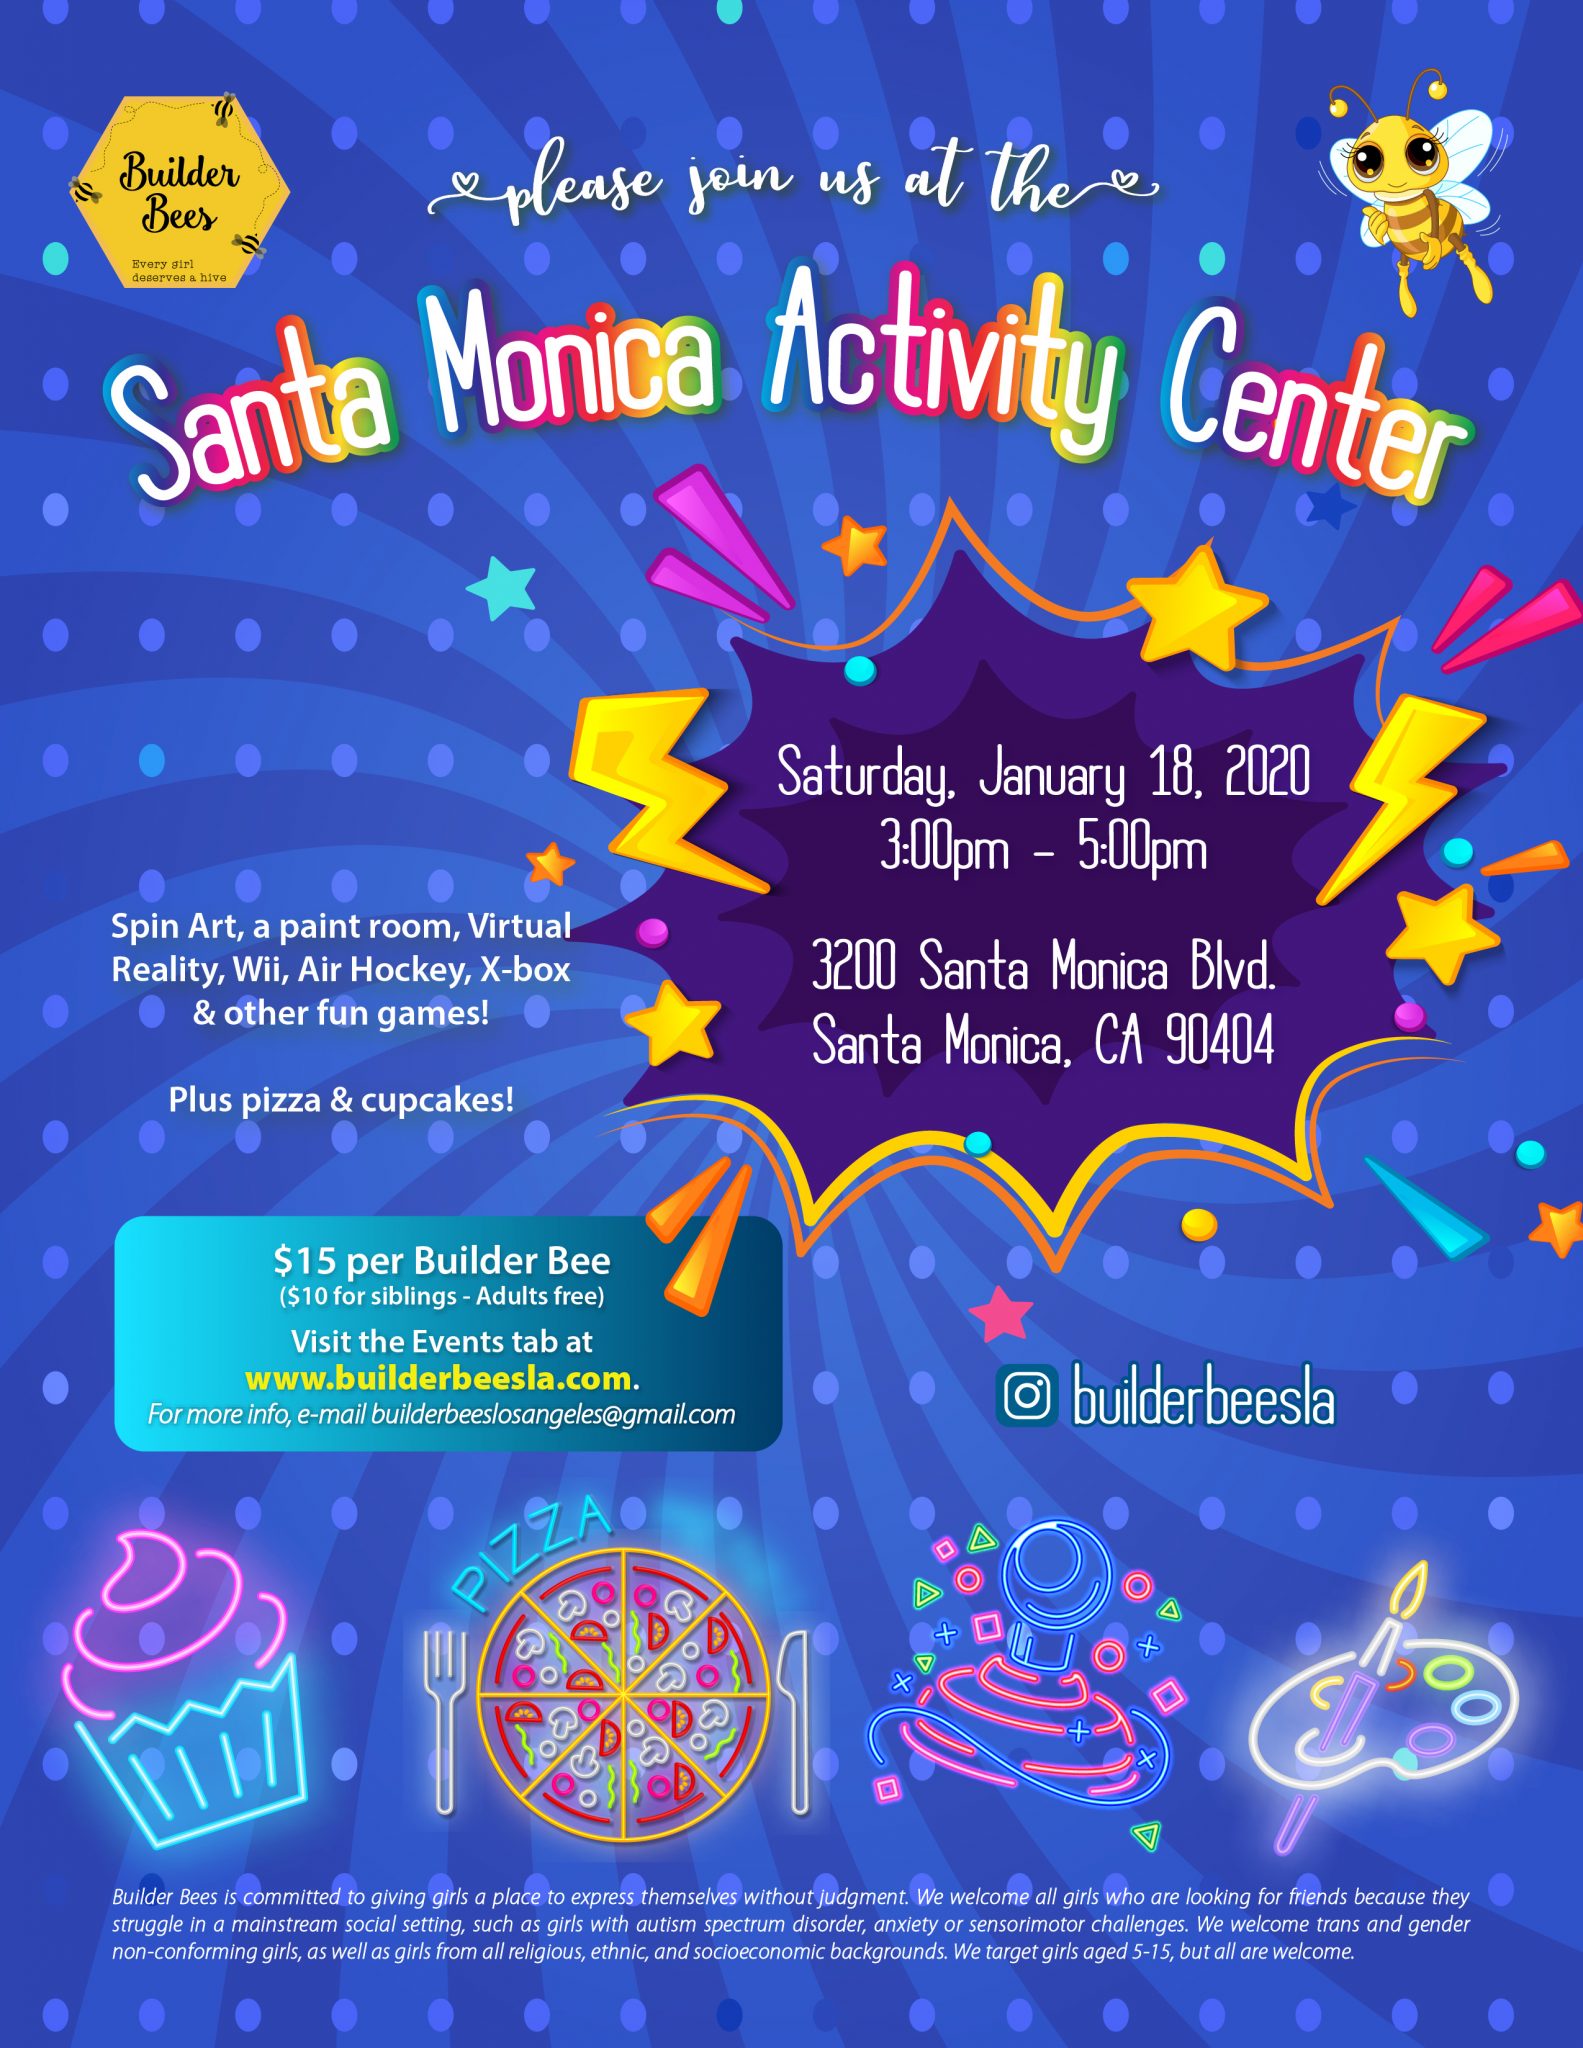 Outing to the Santa Monica Activity Center